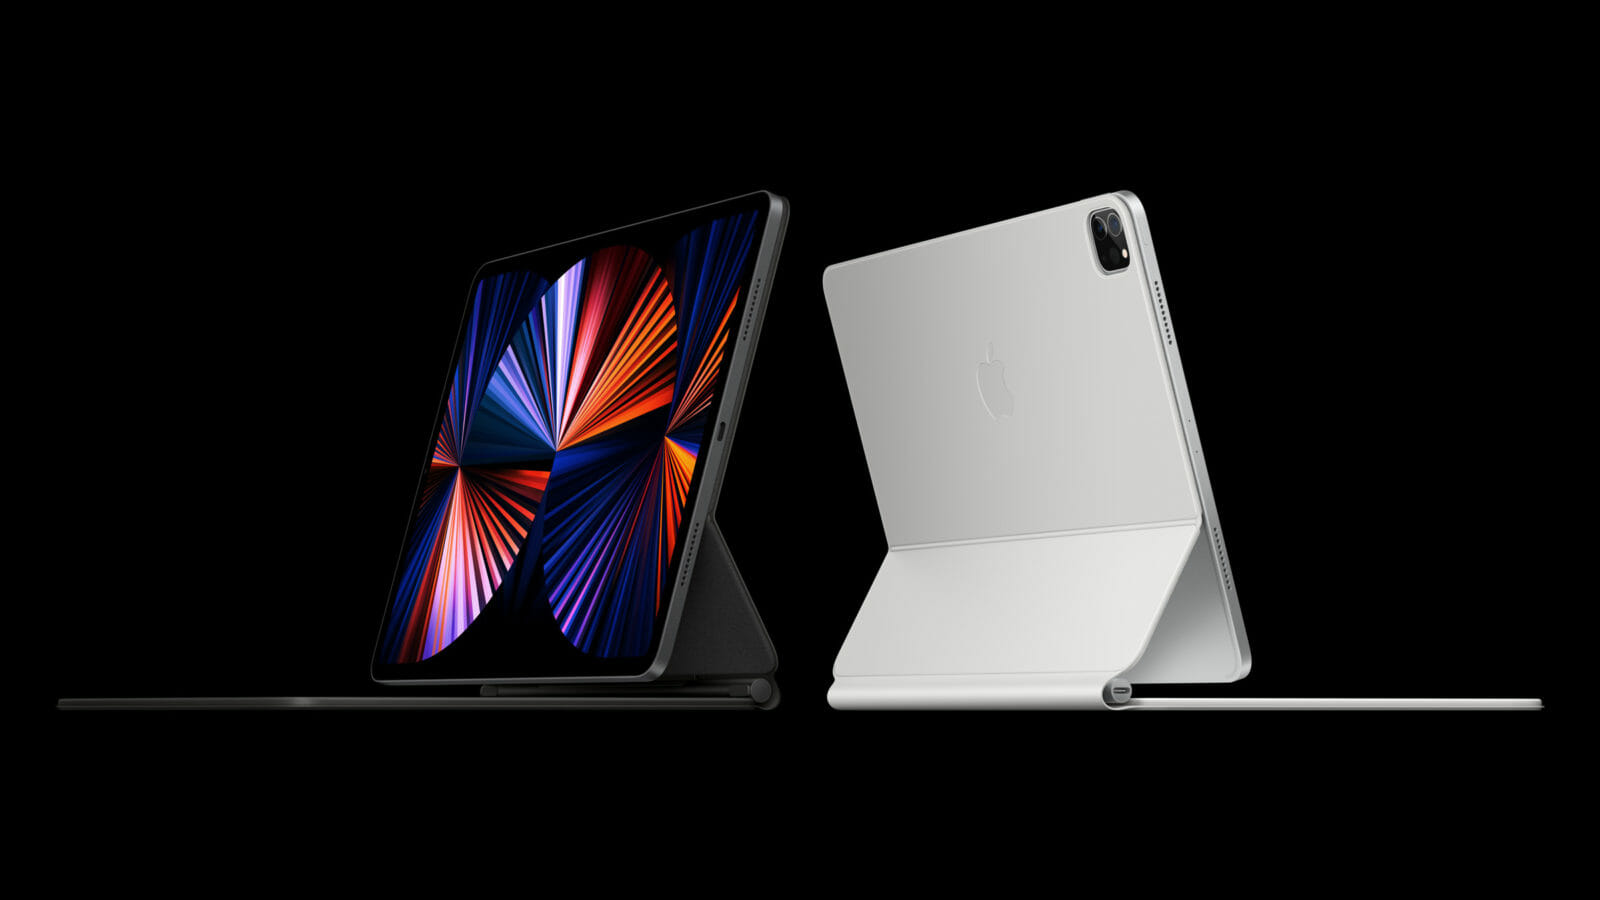 New vs old: How the 2021 iPad Pro will revolutionise the way you work and play